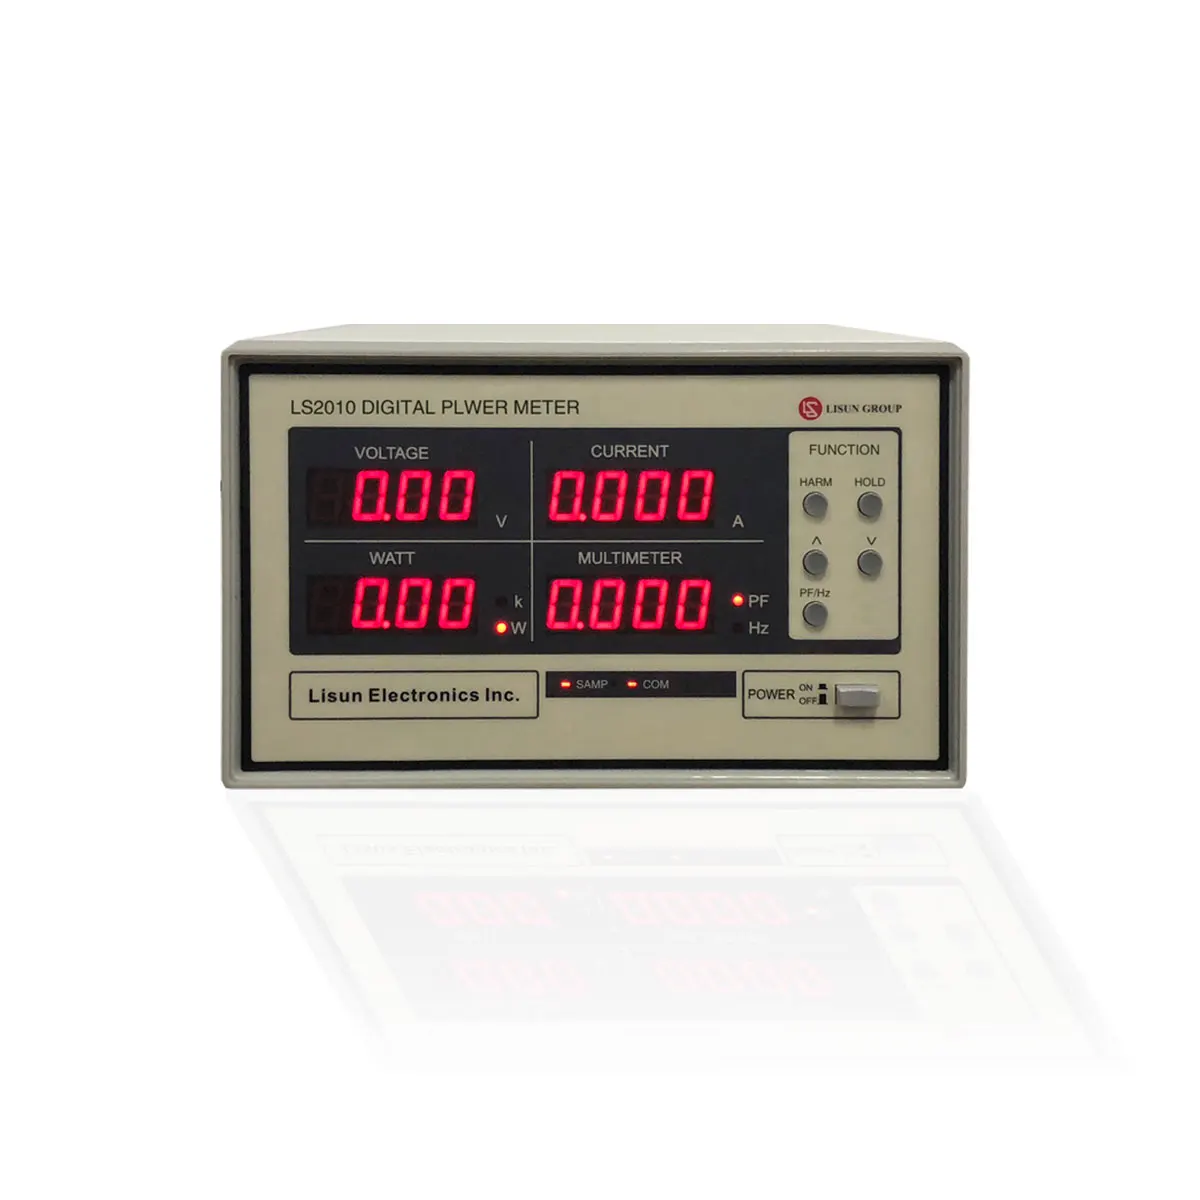 

Voltage Tester - LS2010 Digital Power Meter Measuring Voltage, Current, Power, Power Factor and Harmonic